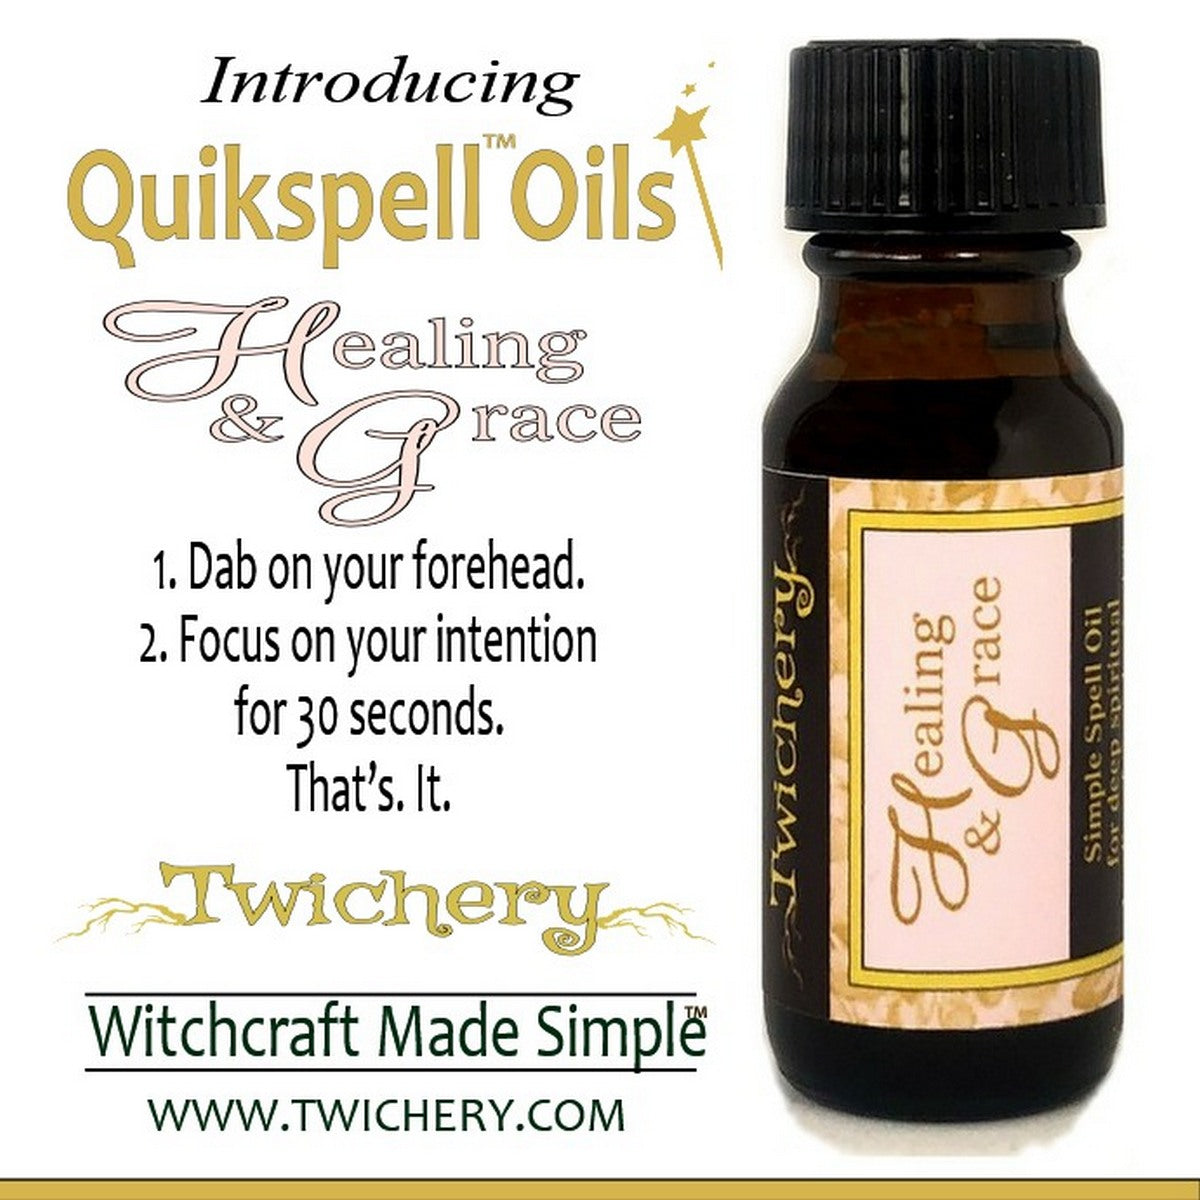 Twichery is Witchcraft Made Simple! Healing & Grace are a dab away! hoodoo, voodoo, wicca, pagan, Witchcraft Made Simple